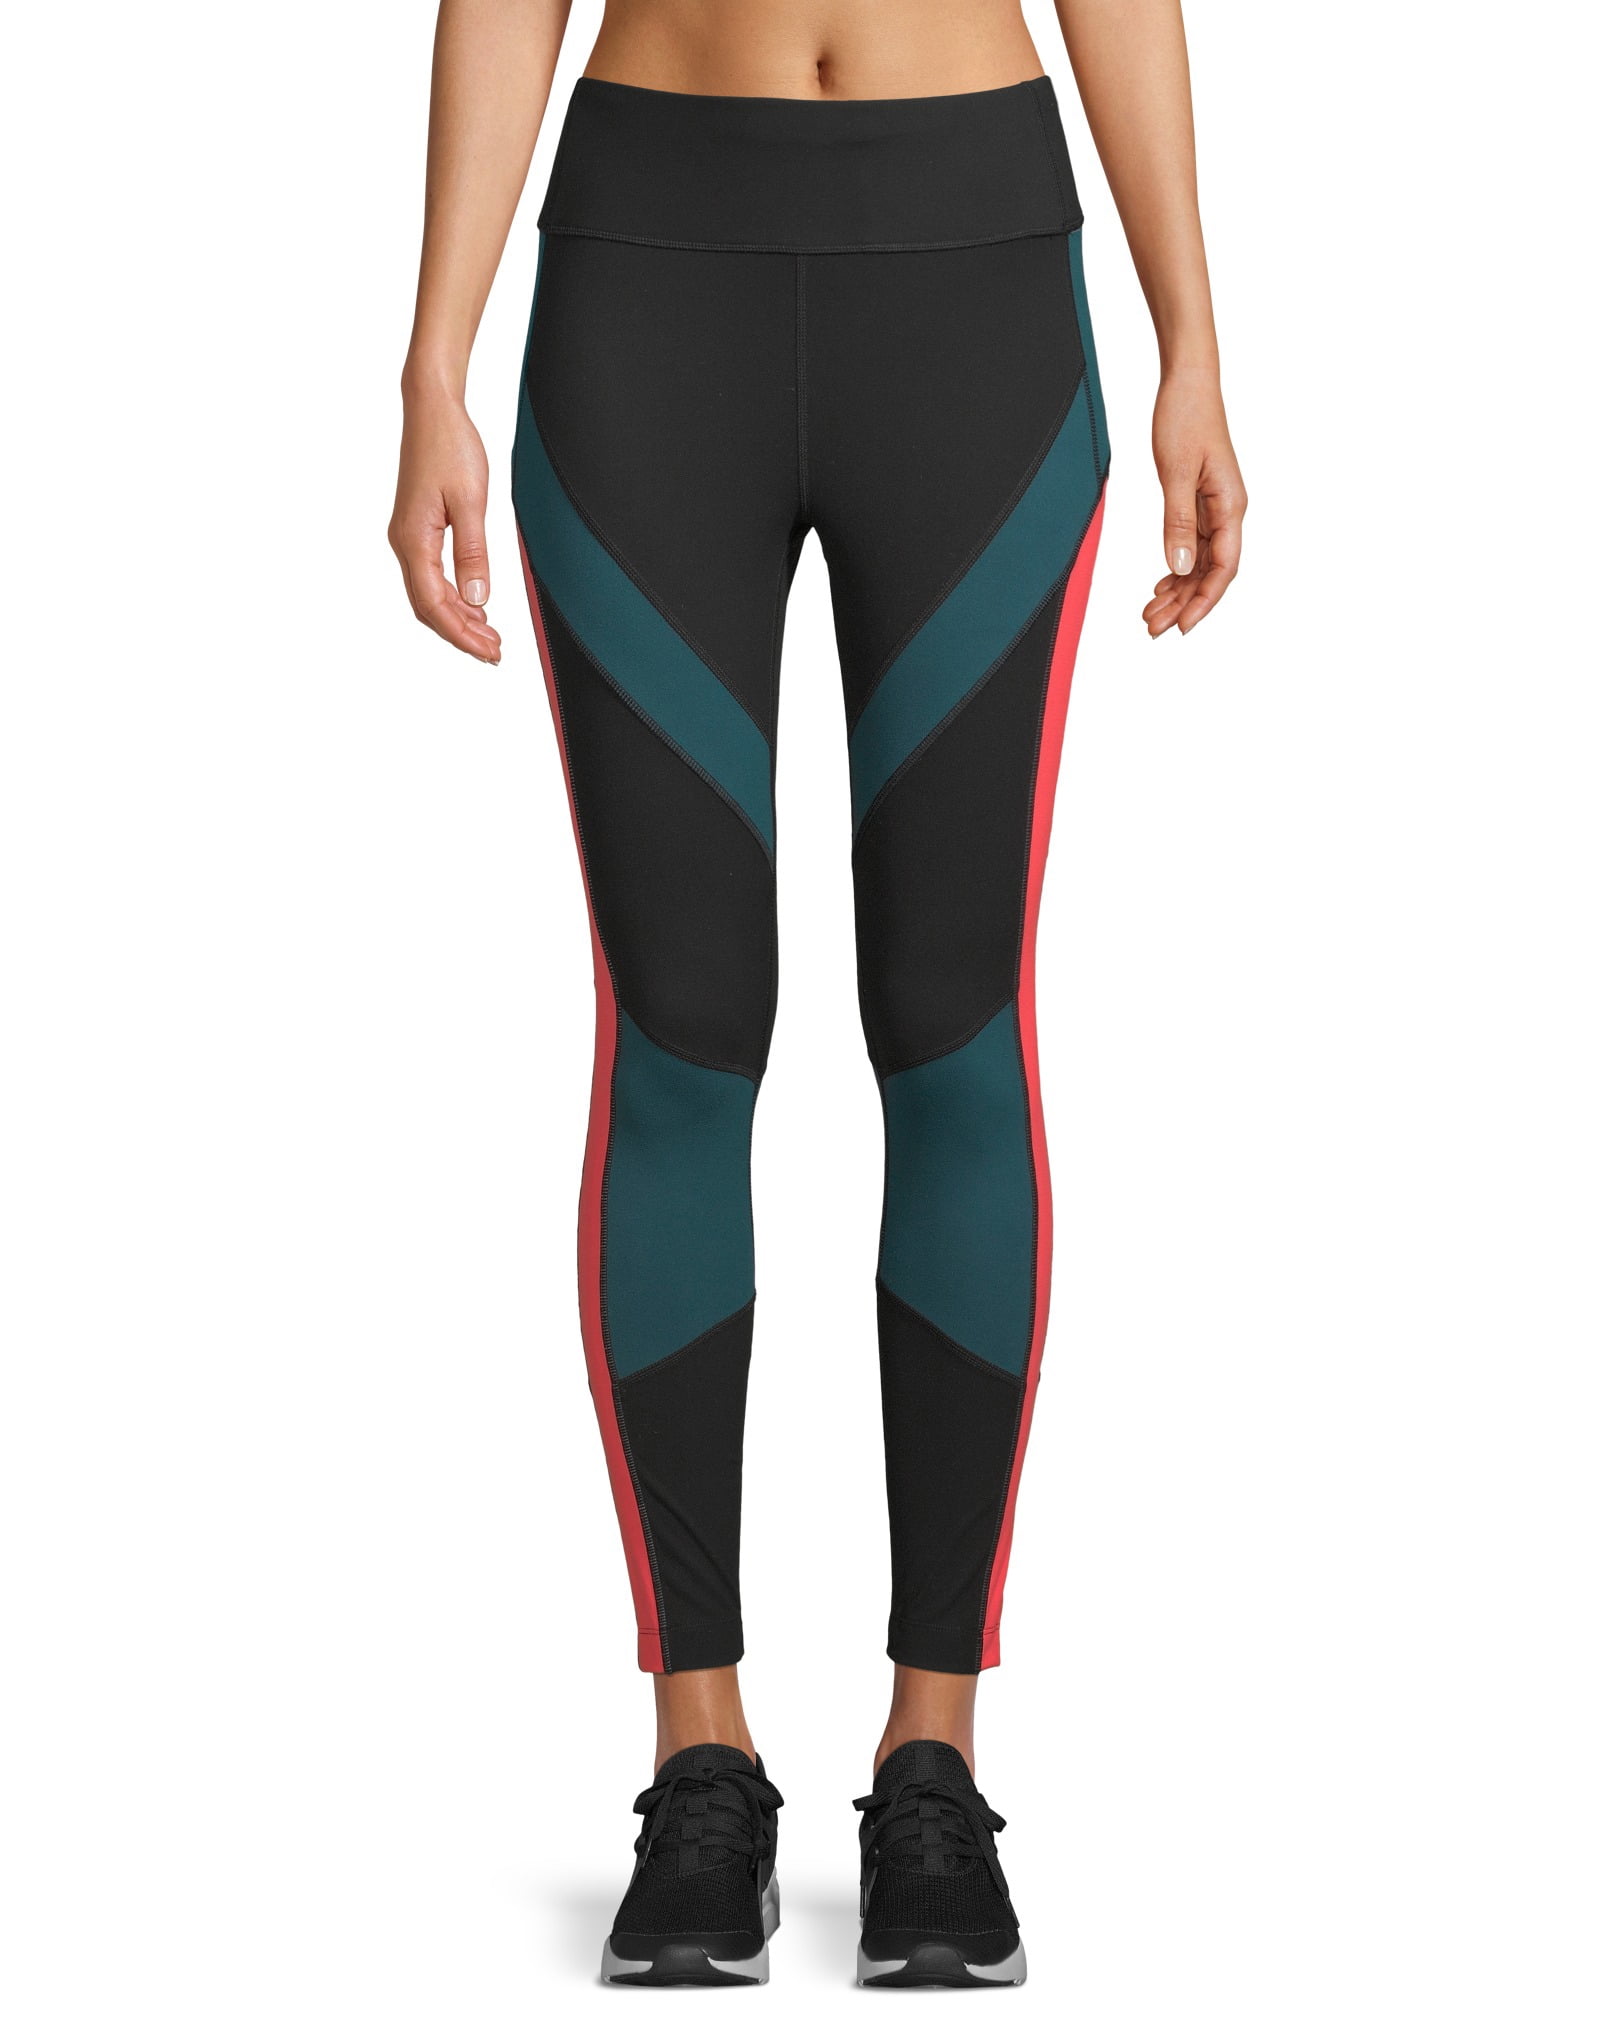 Was looking for workout pants and stumbled across the Avia Women's